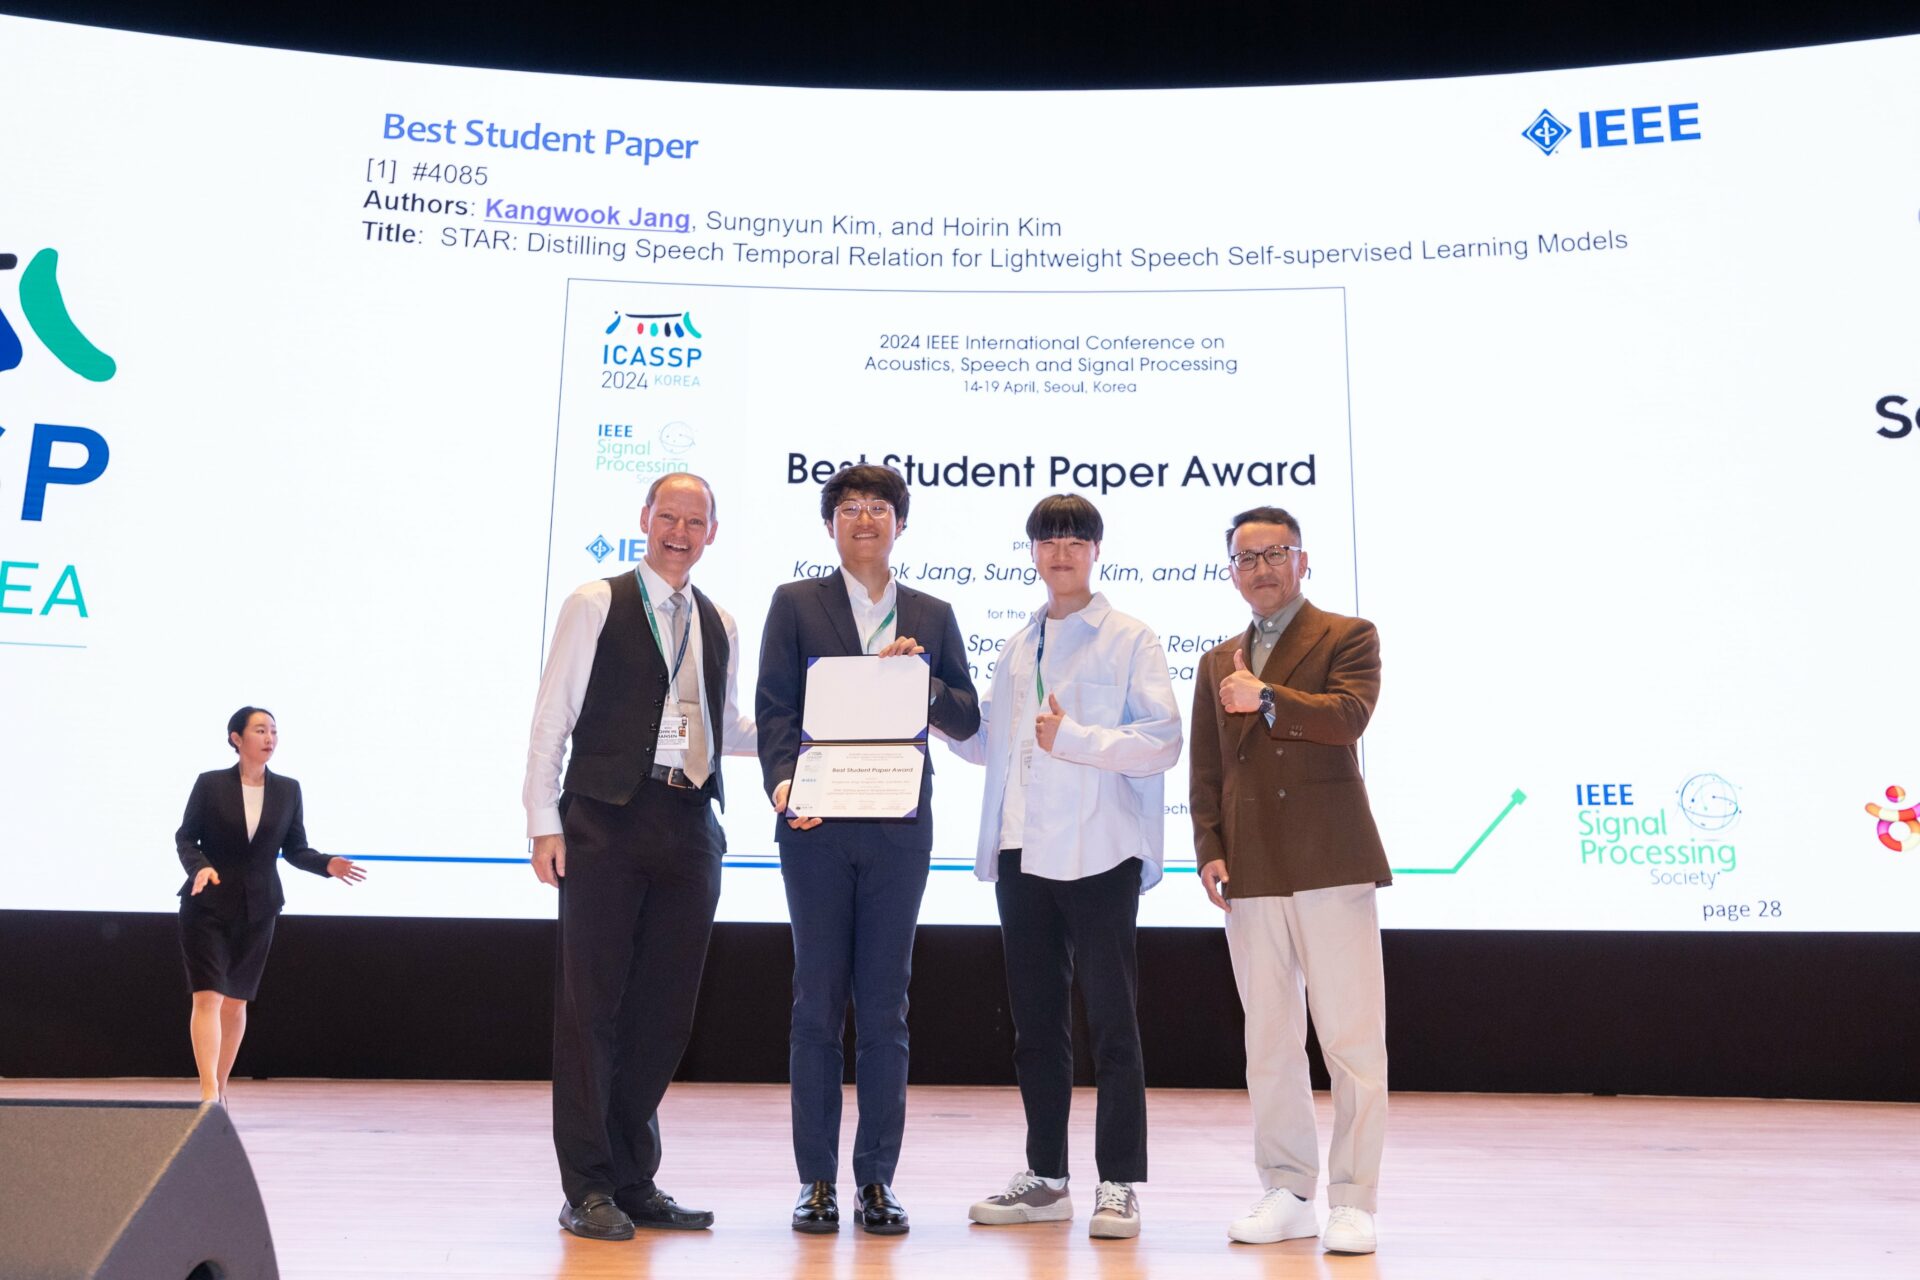 Professor Hoirin Kim’s research team wins ‘Best Student Paper Award’ at the International Conference on Acoustics, Speech, and Signal Processing (ICASSP)